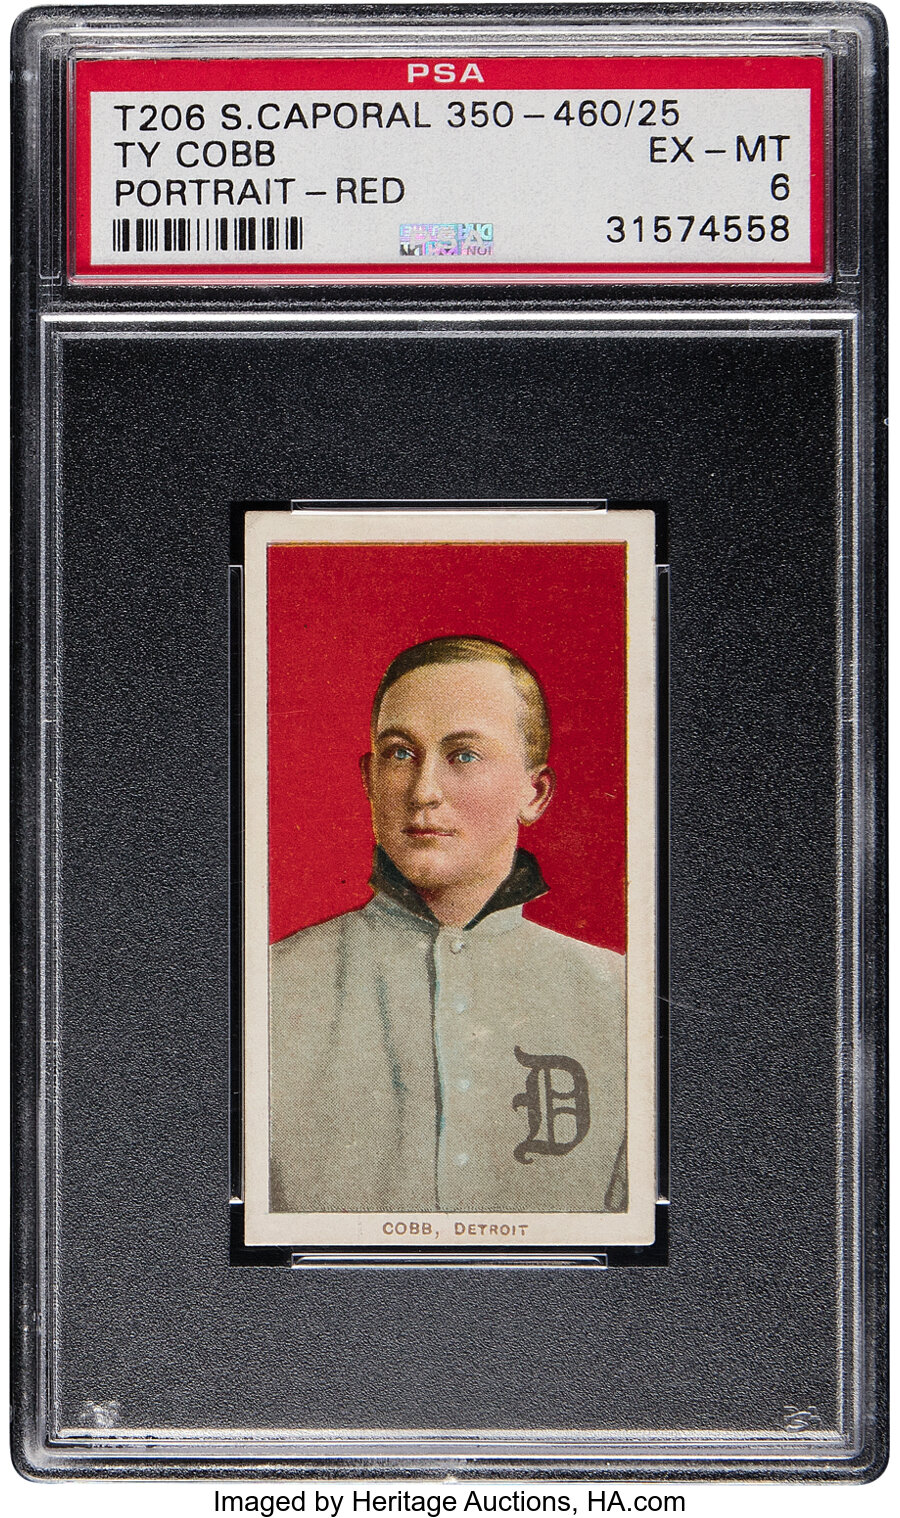 1909-11 T206 Sweet Caporal 350-460/25 Ty Cobb (Portrait - Red) PSA EX-MT 6 - Pop Two with Only Two Higher!